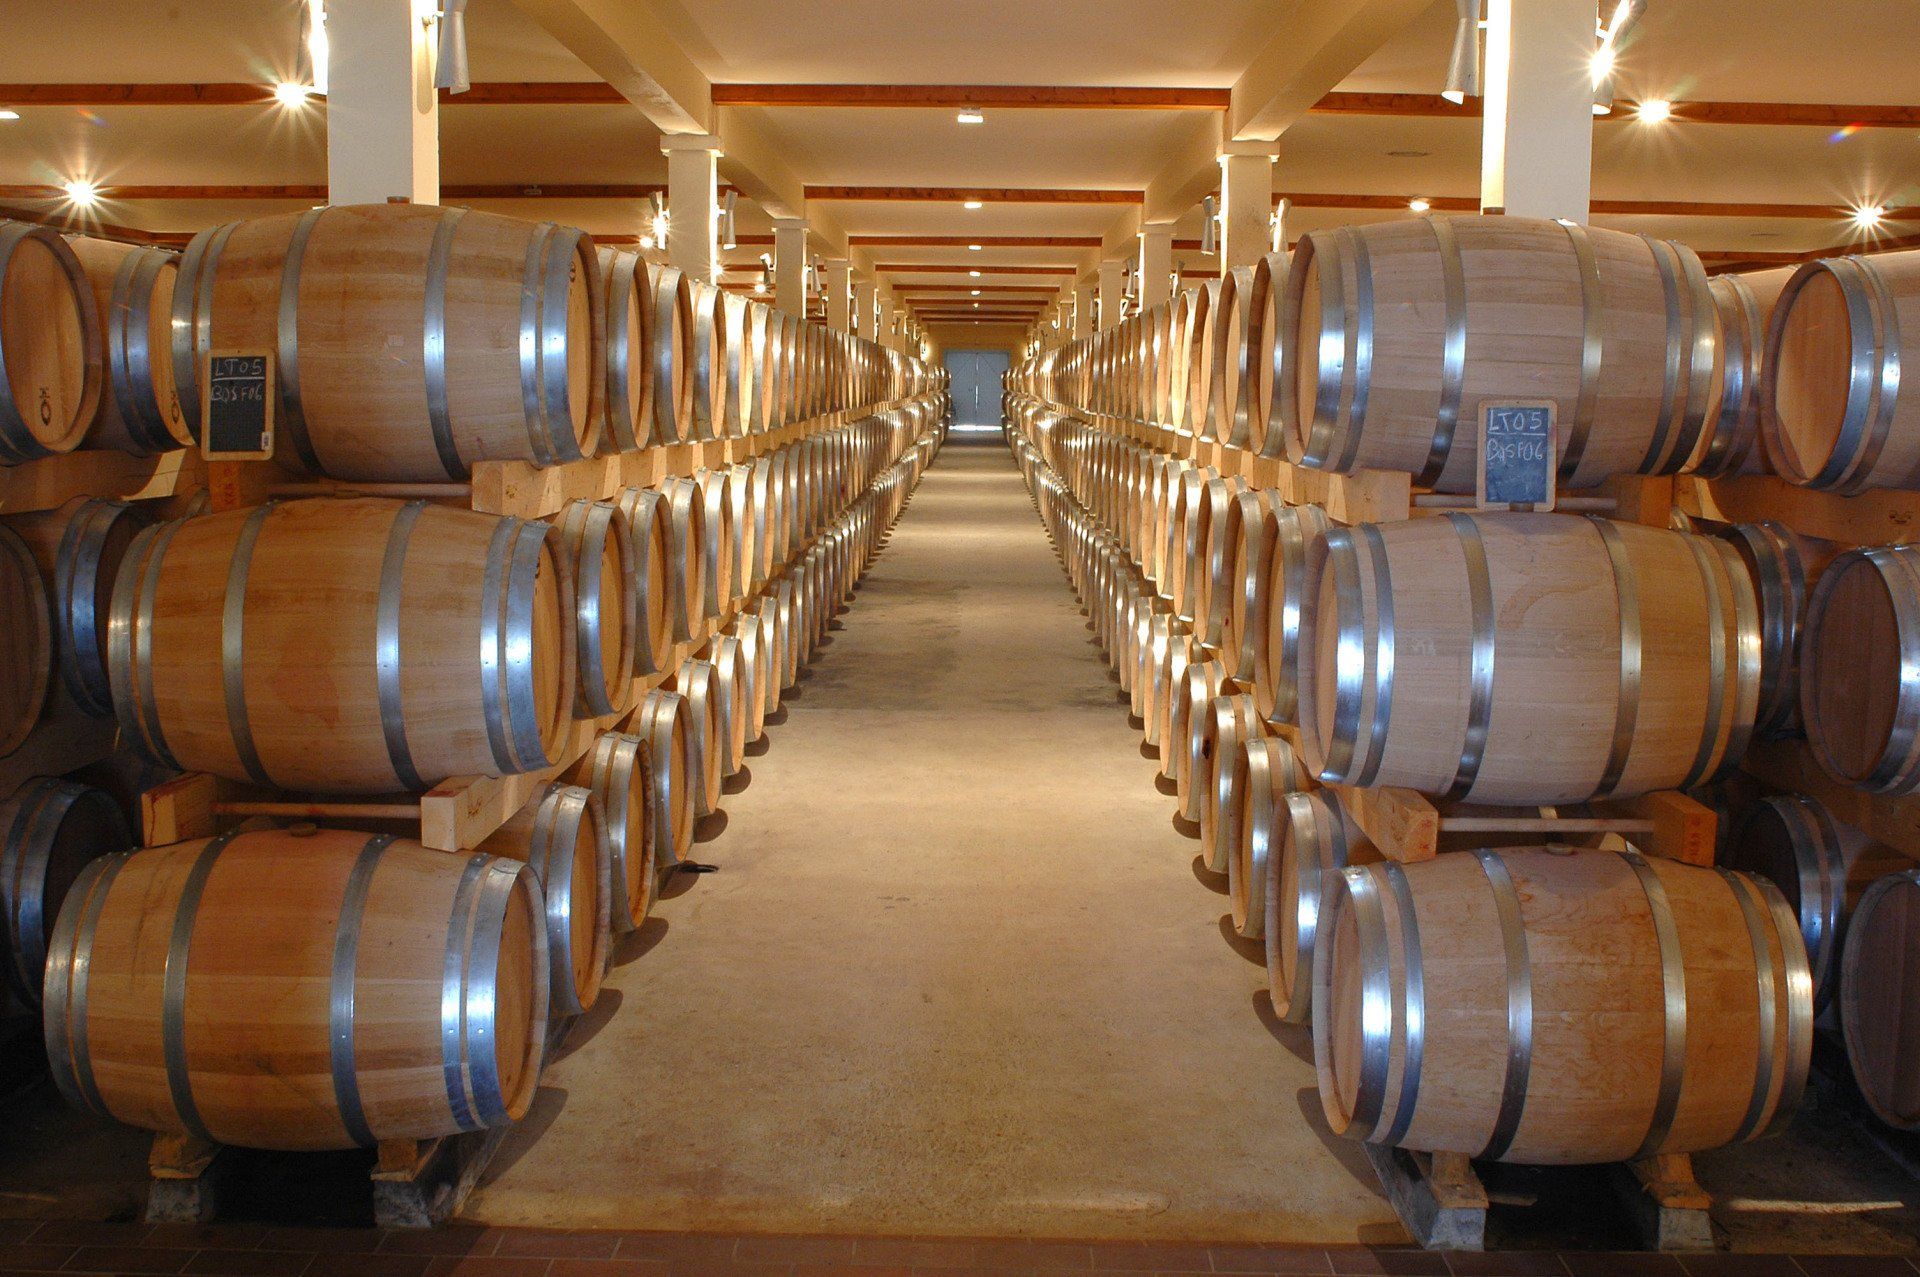 A warehouse filled with lots of wooden barrels